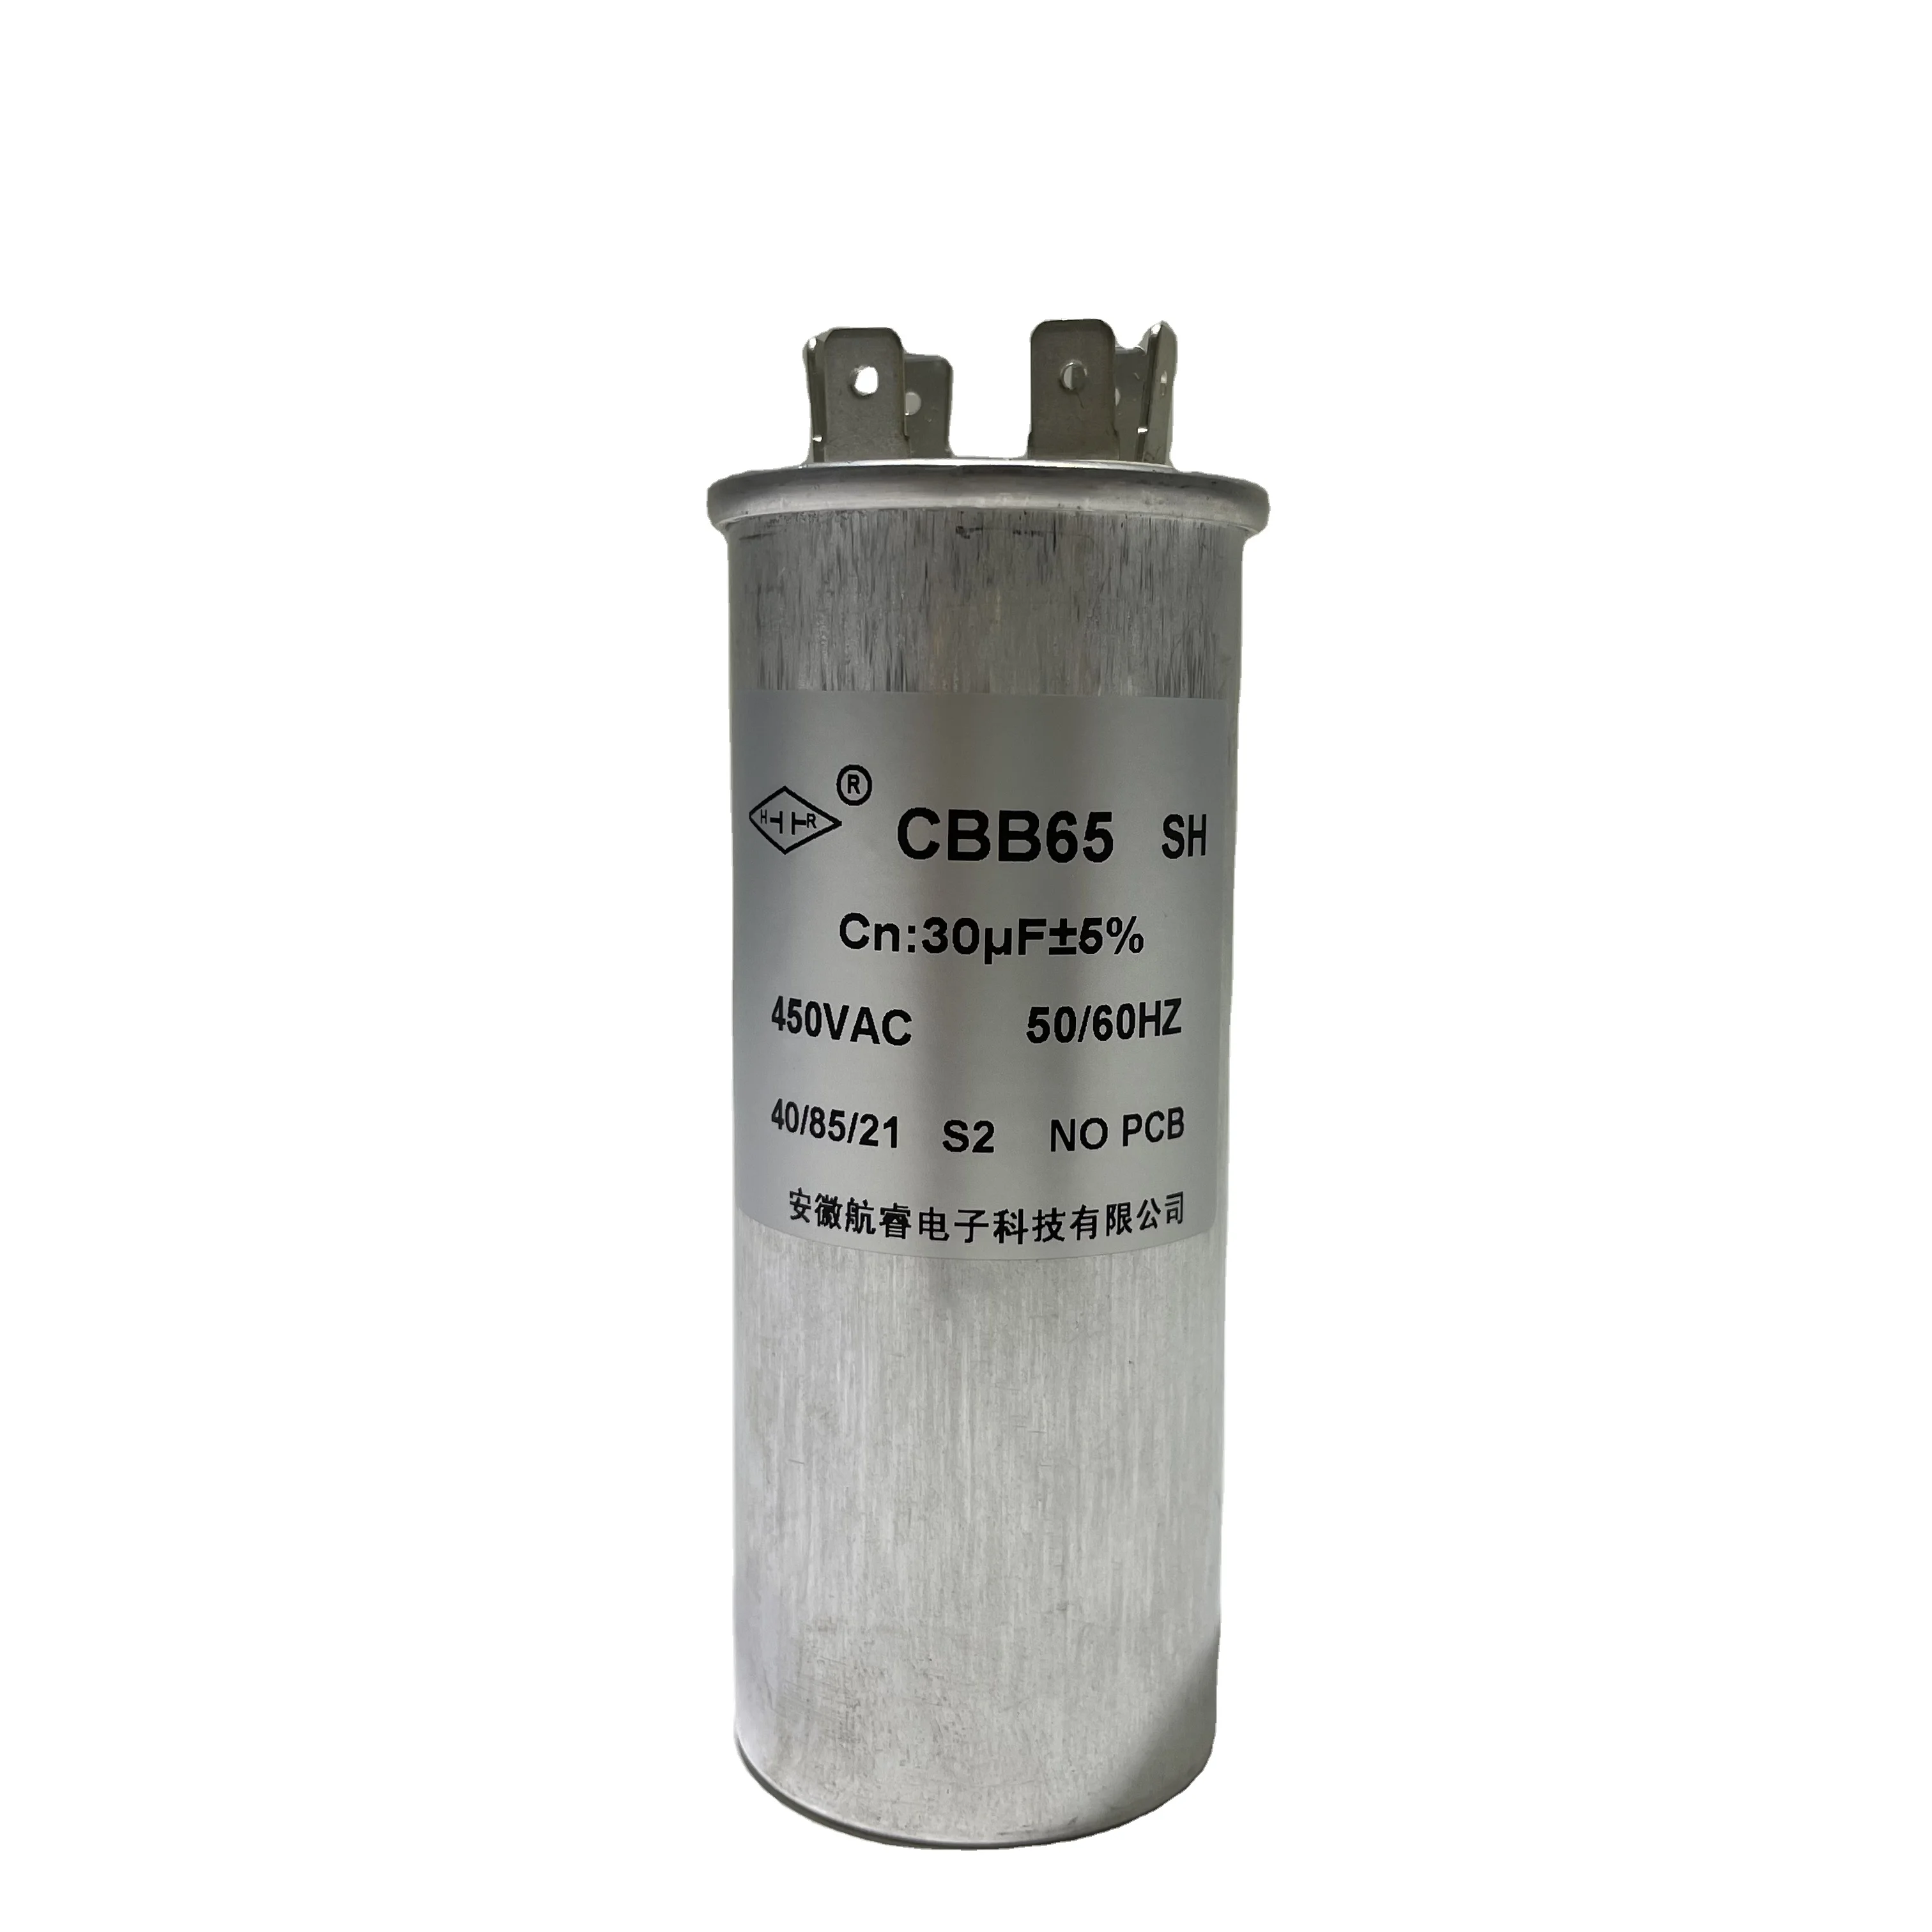 CBB65 capacitors power factor correction intelligent electric low voltge capacitor bank 450V 30uf (11000004580196)